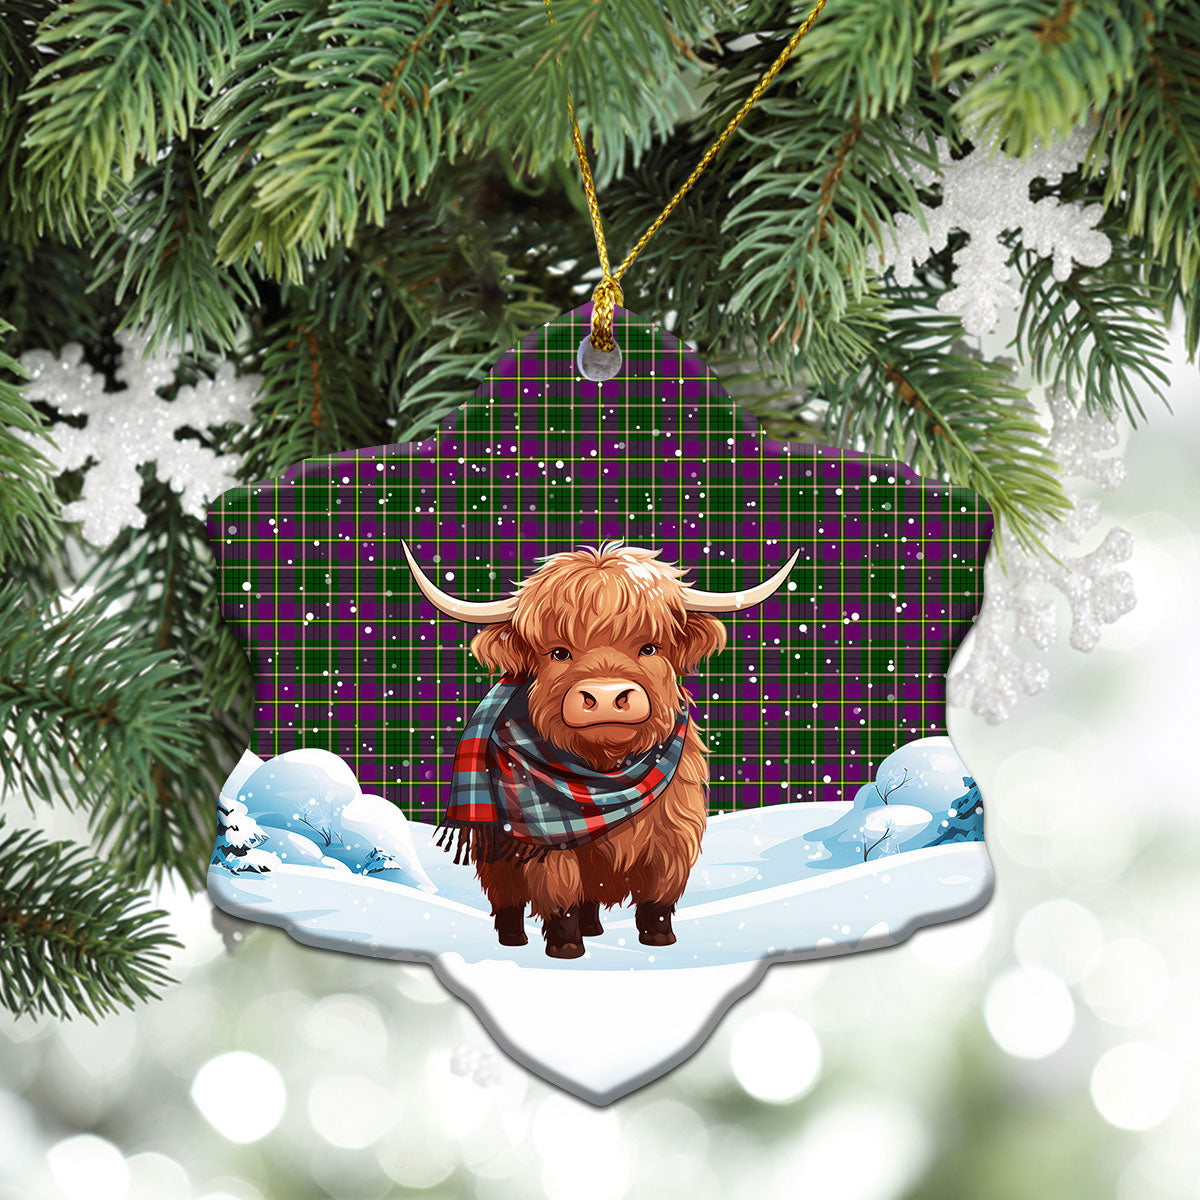 Tailyour (or Taylor) Tartan Christmas Ceramic Ornament - Highland Cows Snow Style